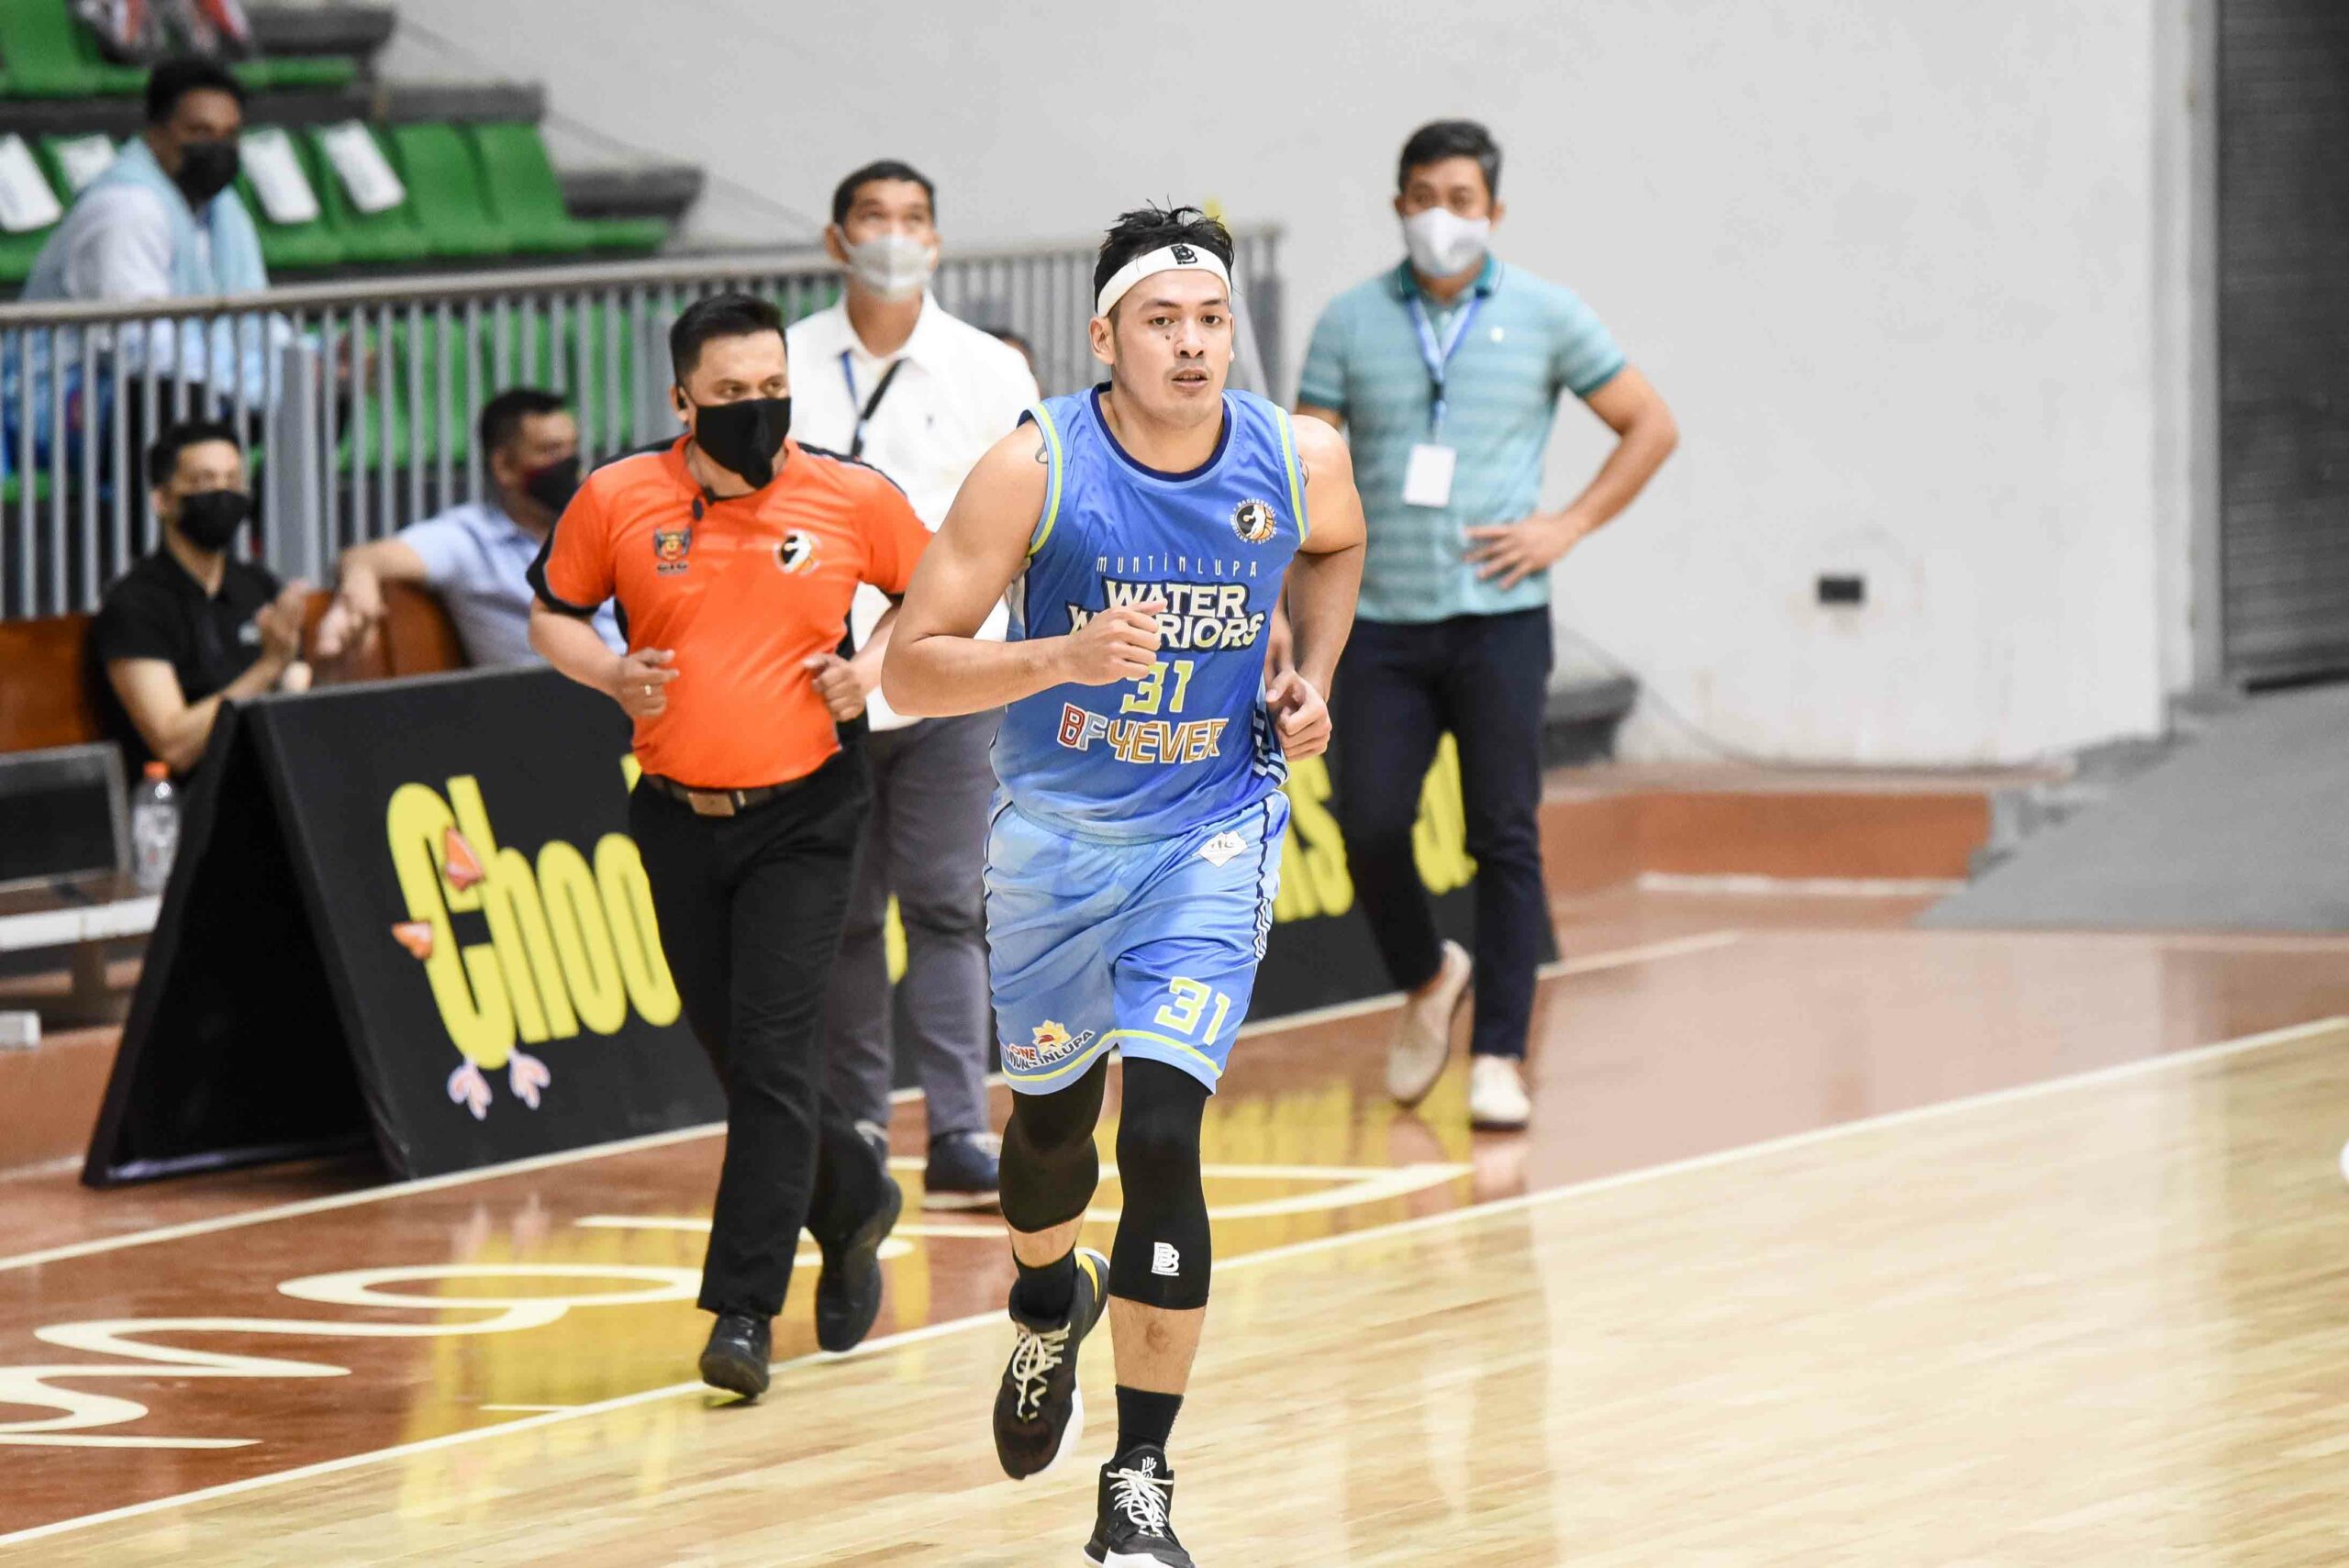 2021-Chooks-to-Go-NBL-Paranaque-vs-Muntinlupa-Ebrahim-Enguio-Muntinlupa-scaled Parañaque survives Enguio's 30-point explosion for fourth NBL win Basketball NBL News  - philippine sports news